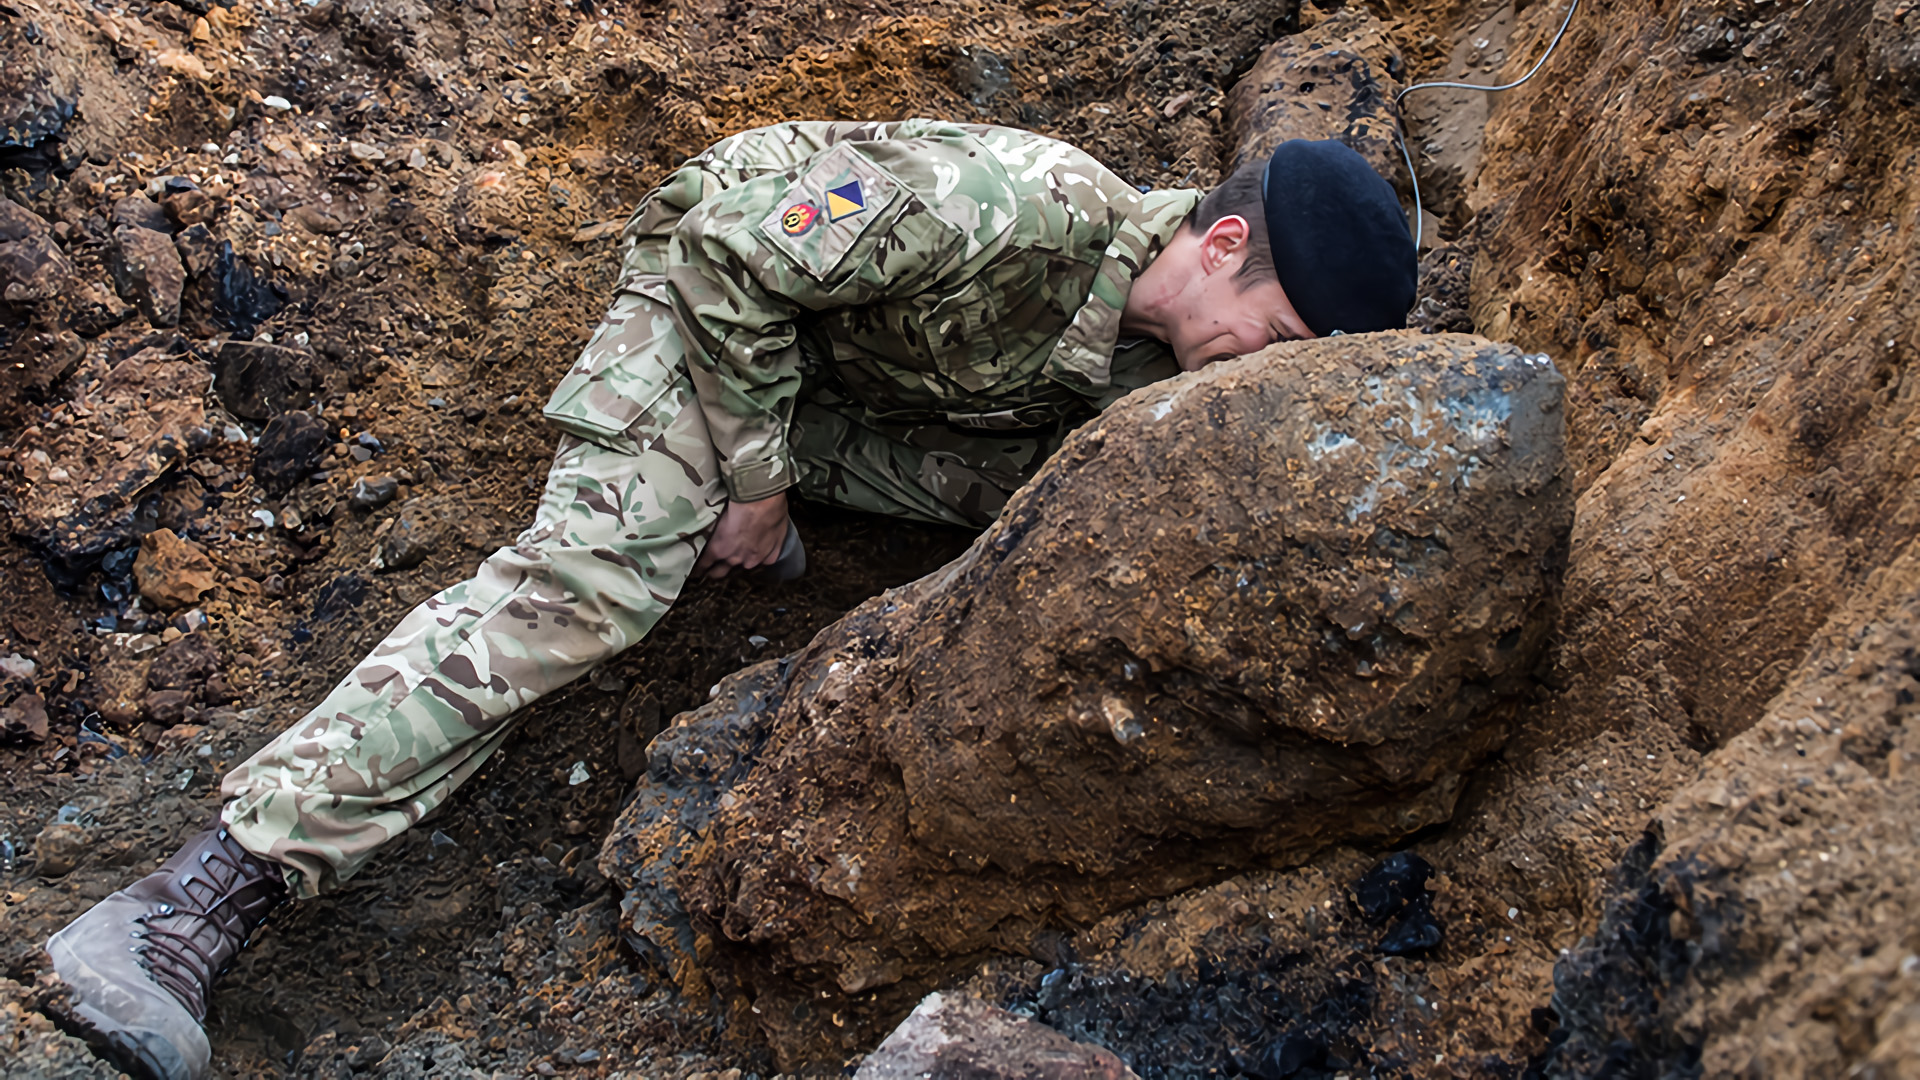 British army bomb disposal expert works on World War II era German bomb discovered in London in 2015.